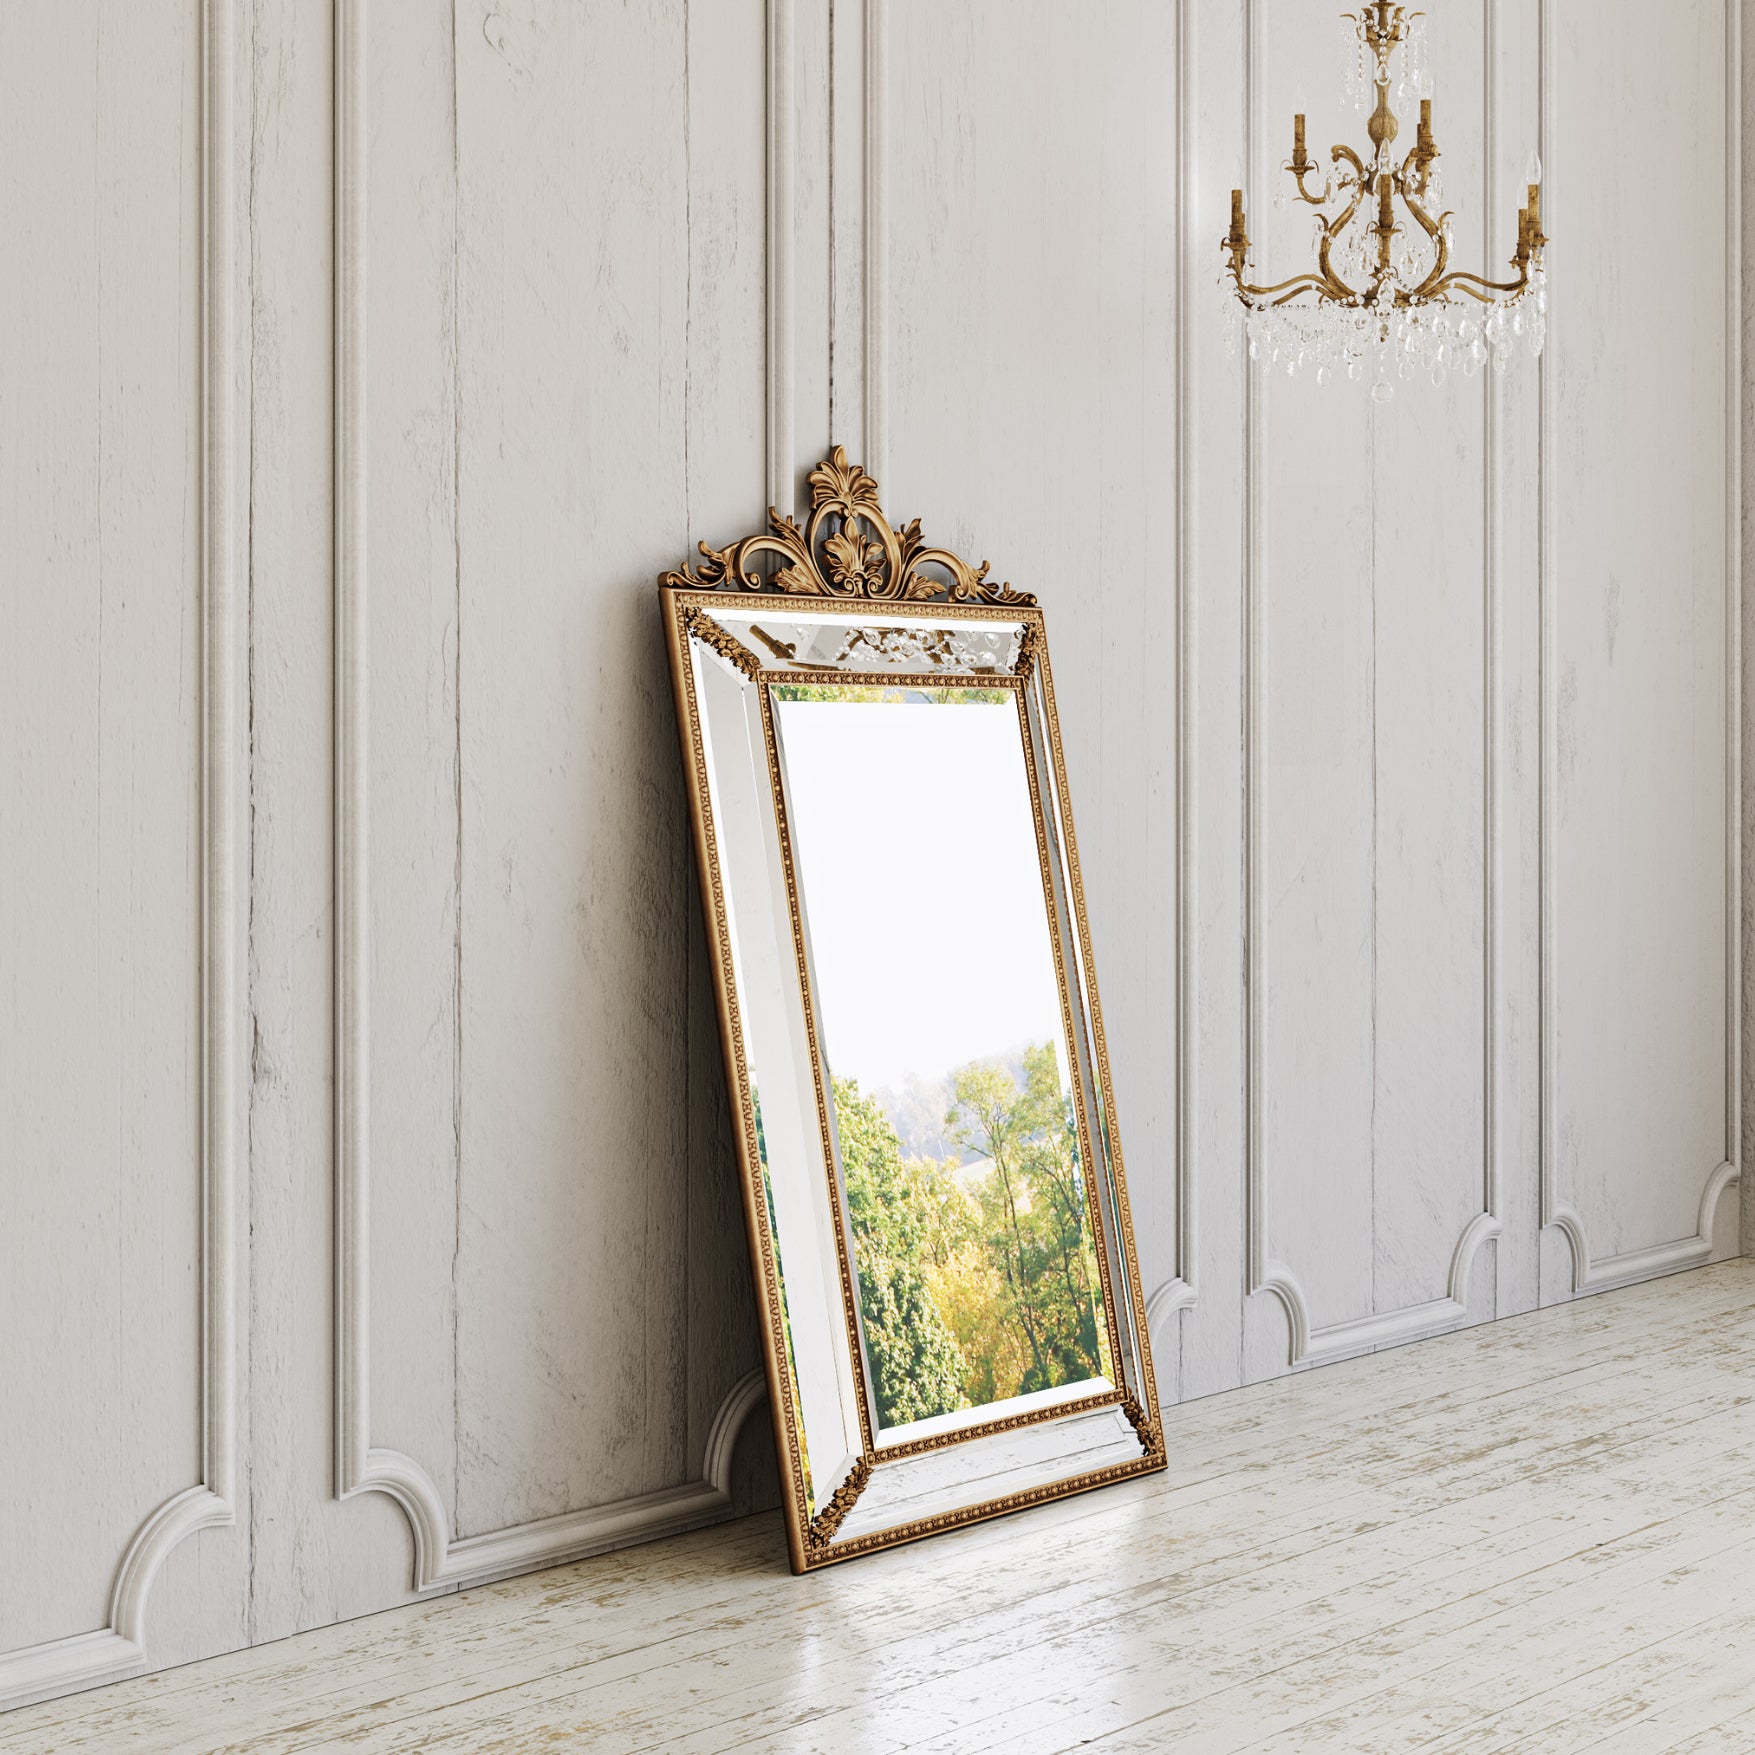 Villecerf Mirror, French Gilt Gold Mirror with Intricate Carvings-Manoir